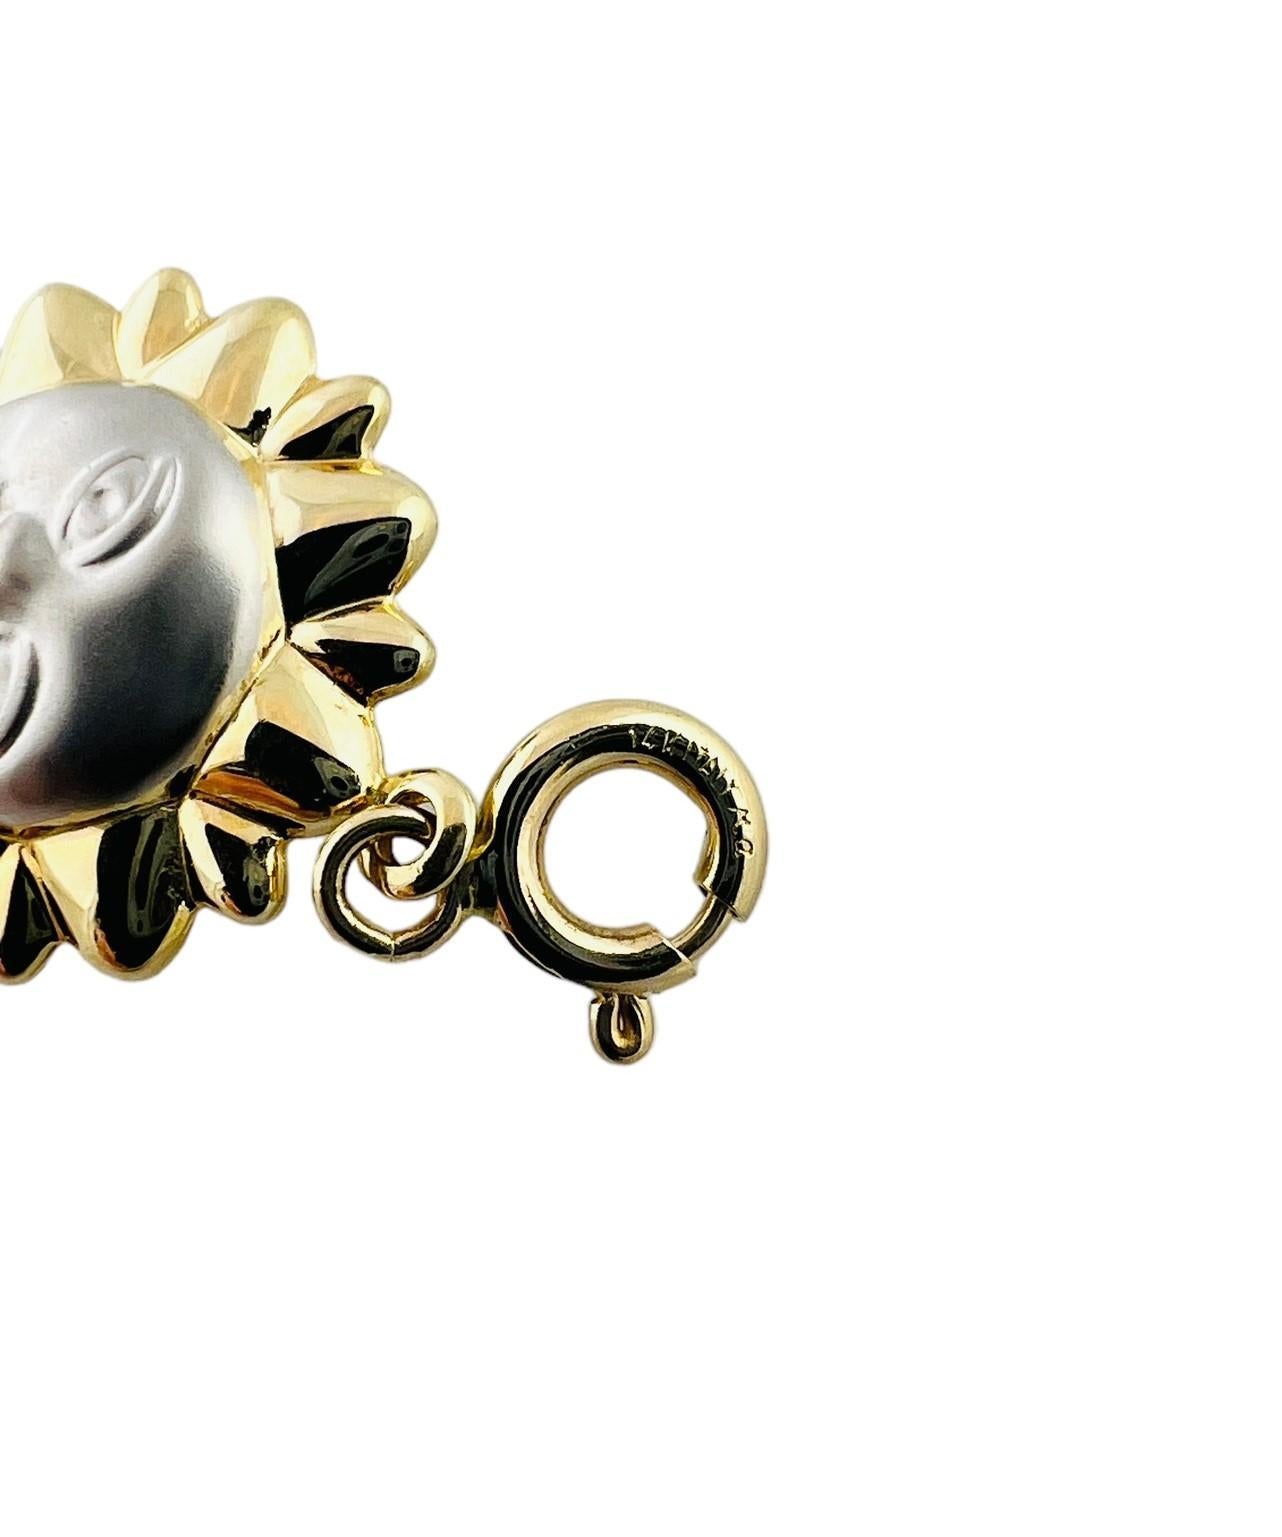 14K Yellow and White Gold Sun Face Charm #15549 For Sale 2